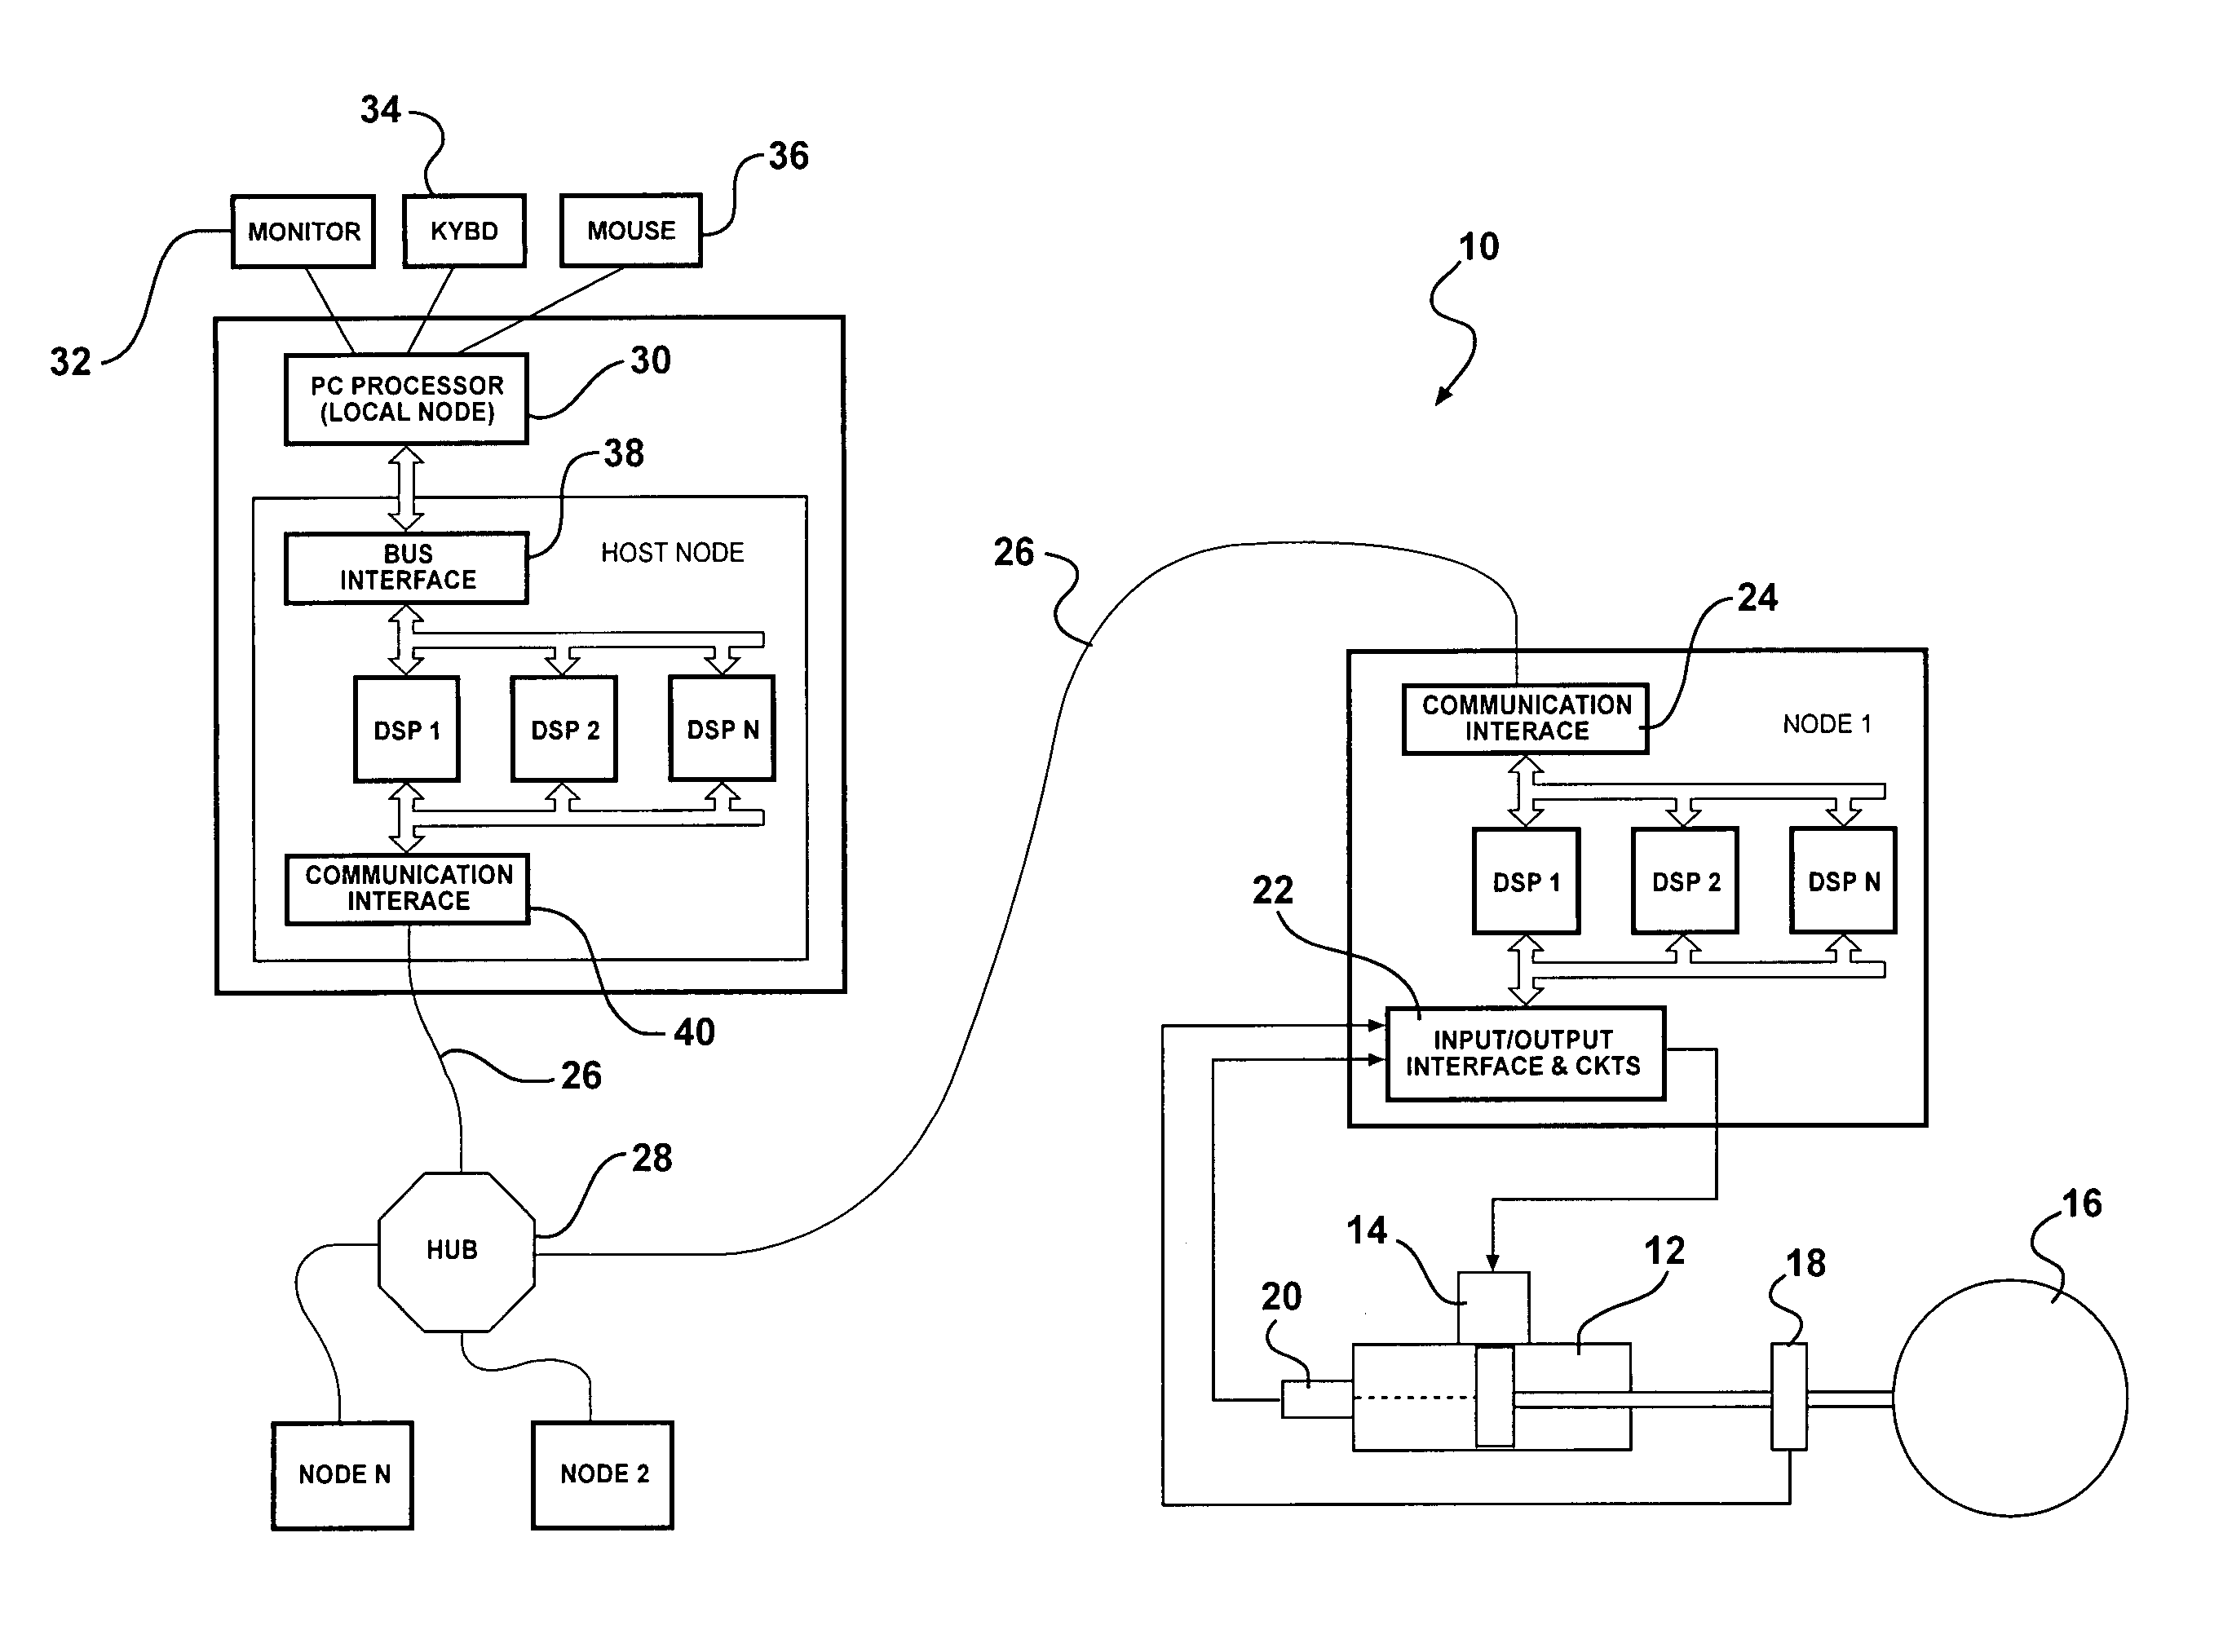 Method of programming a processing system